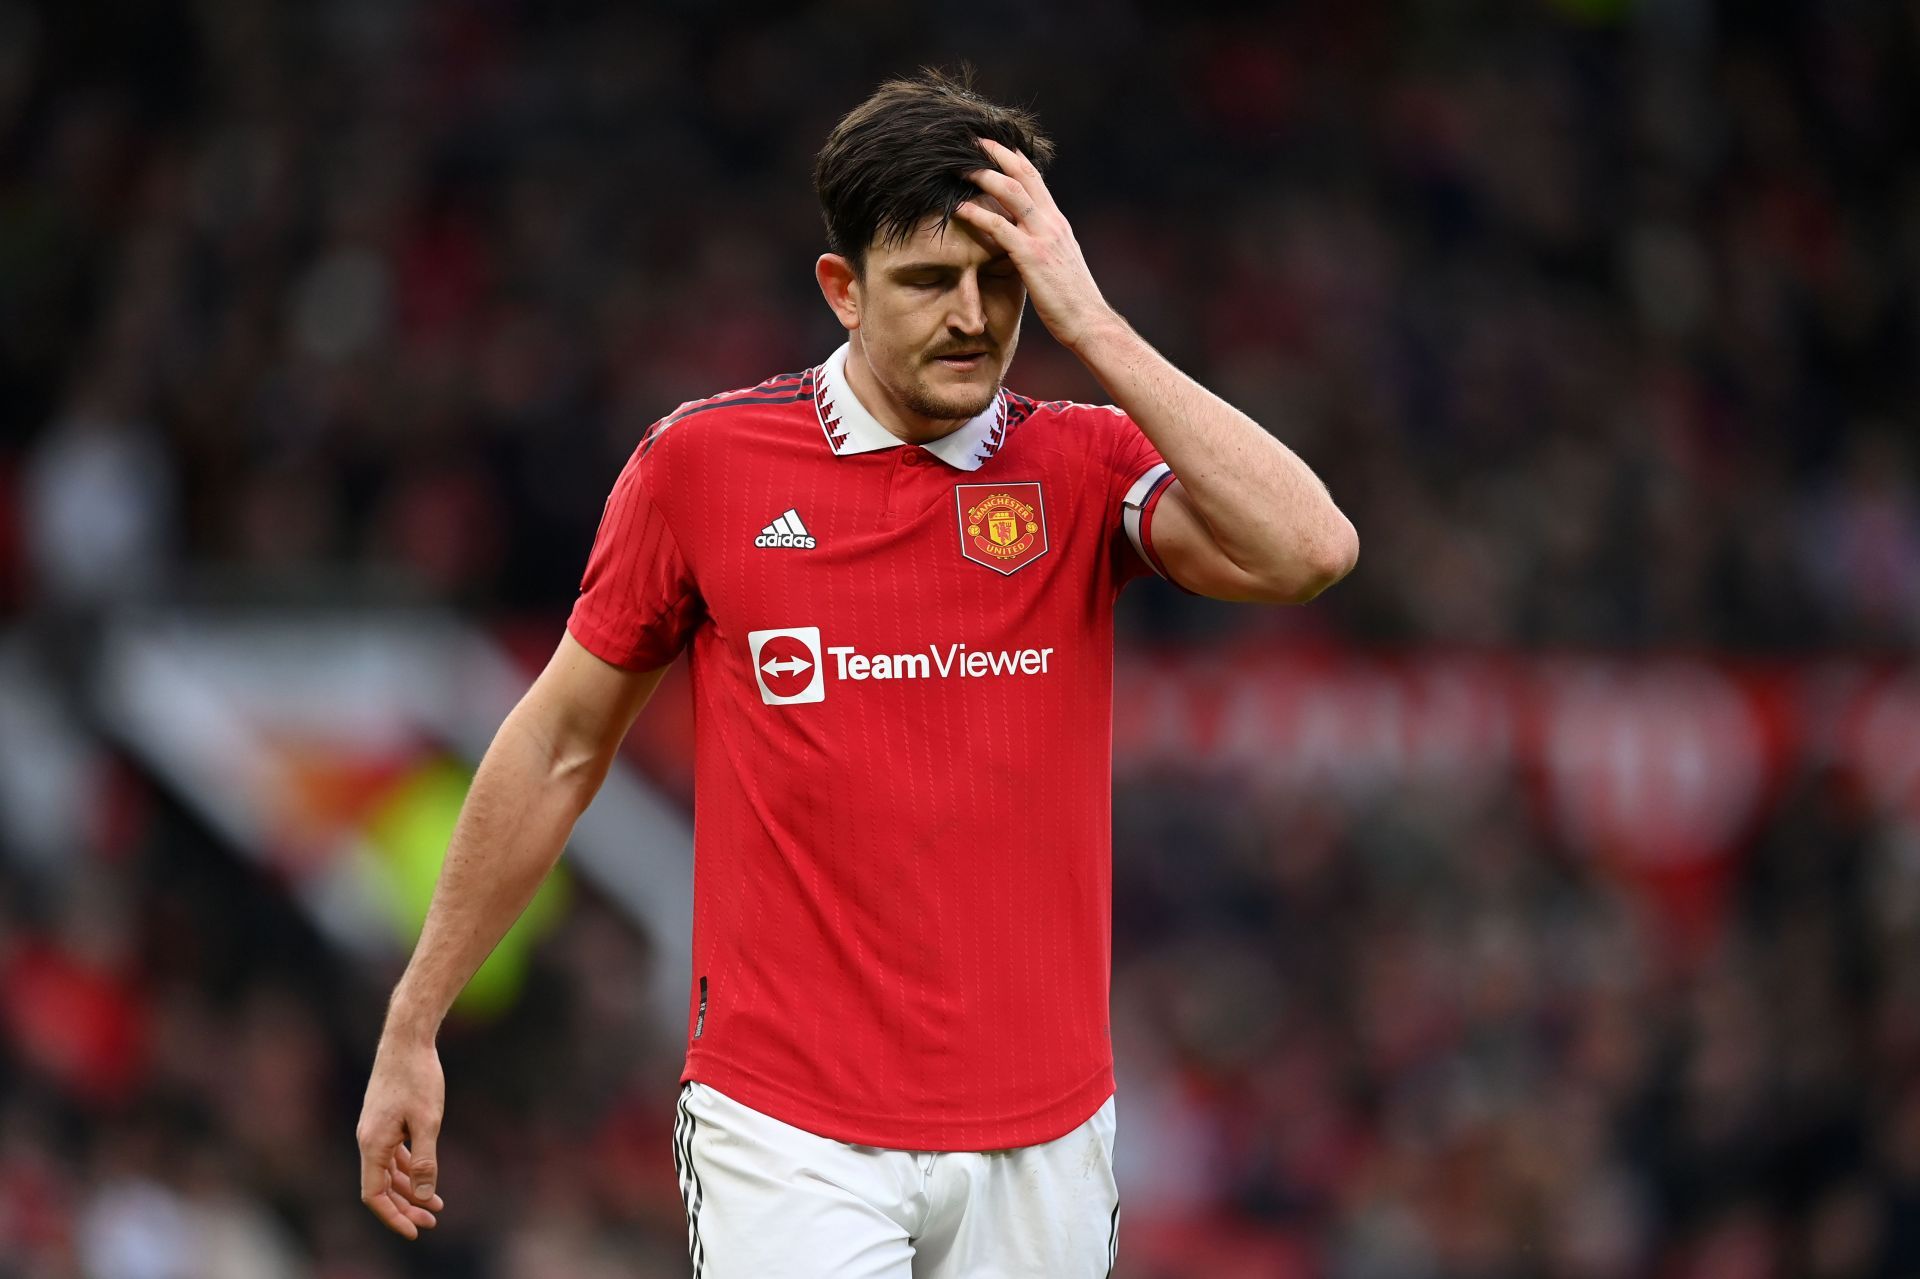 Maguire is on his way out of Manchester United